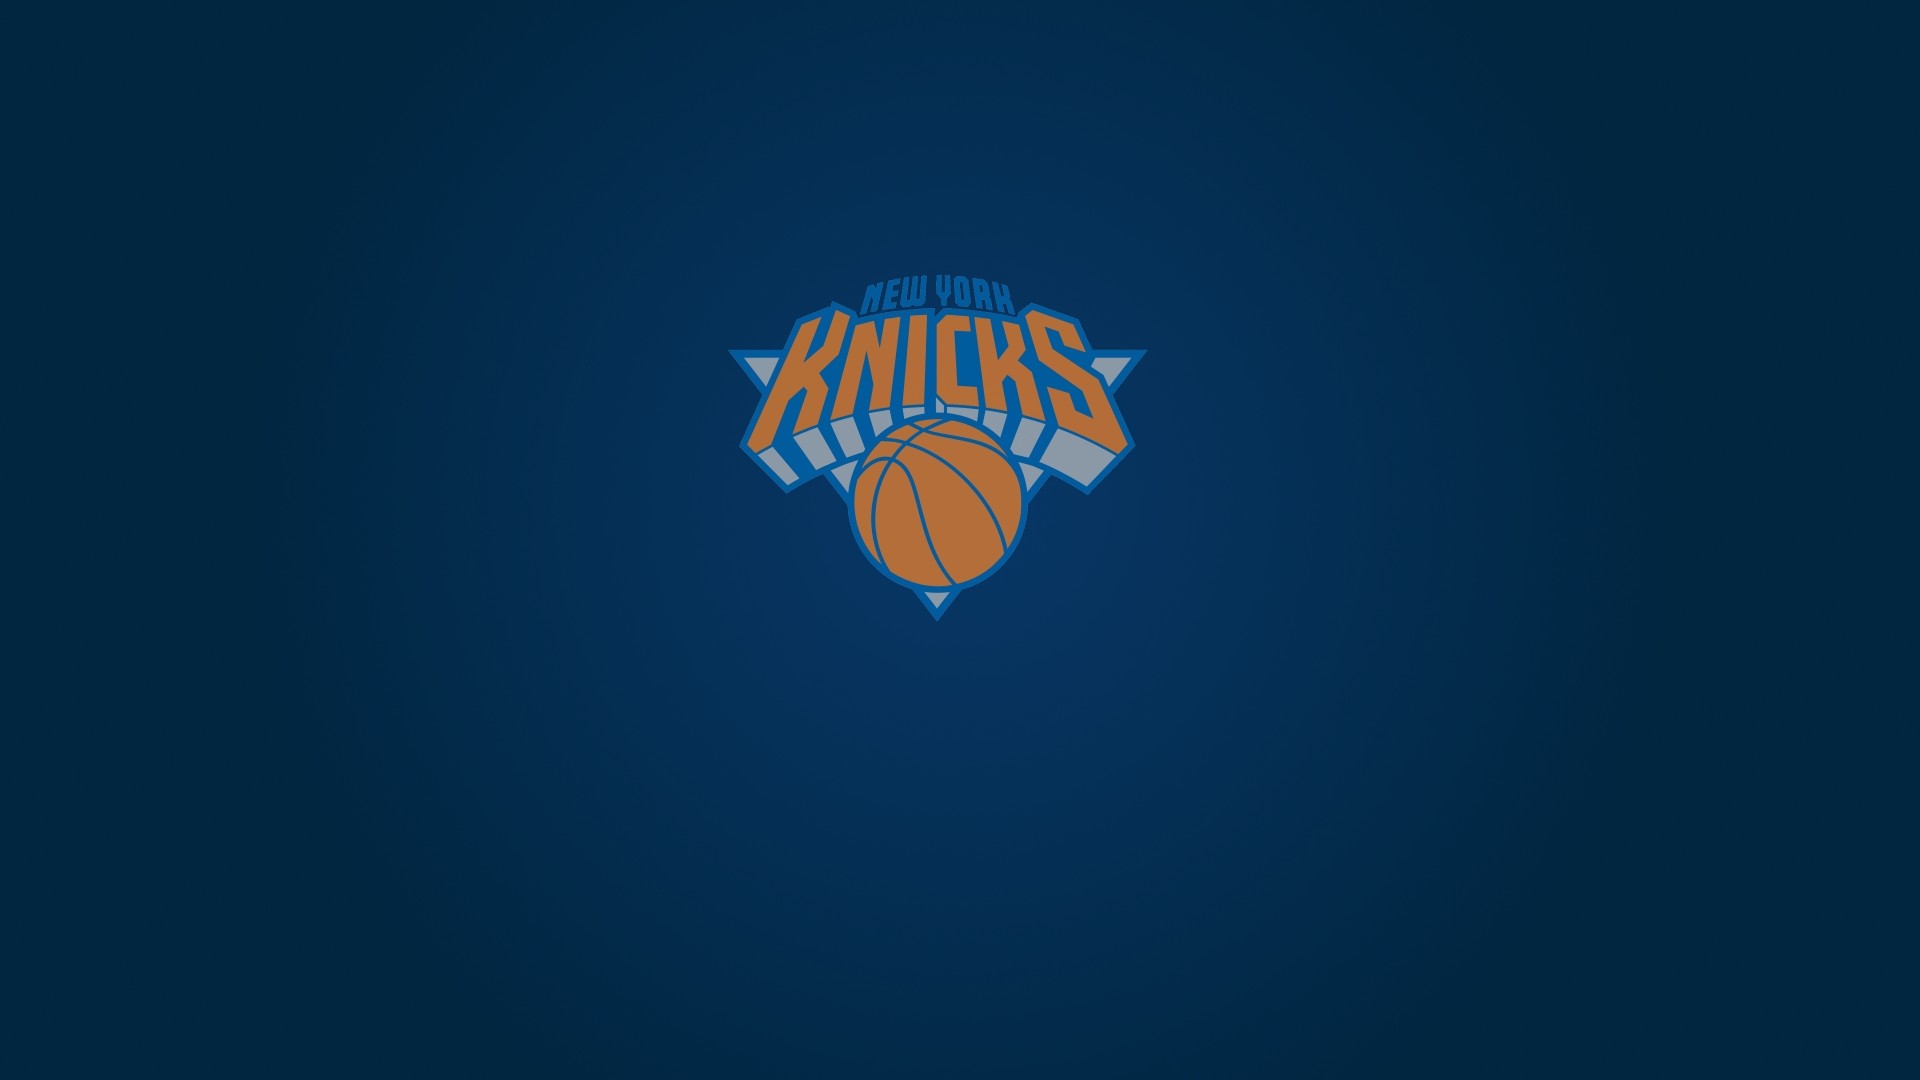 NY Knicks HD Wallpapers with image dimensions 1920x1080 pixel. You can make this wallpaper for your Desktop Computer Backgrounds, Windows or Mac Screensavers, iPhone Lock screen, Tablet or Android and another Mobile Phone device